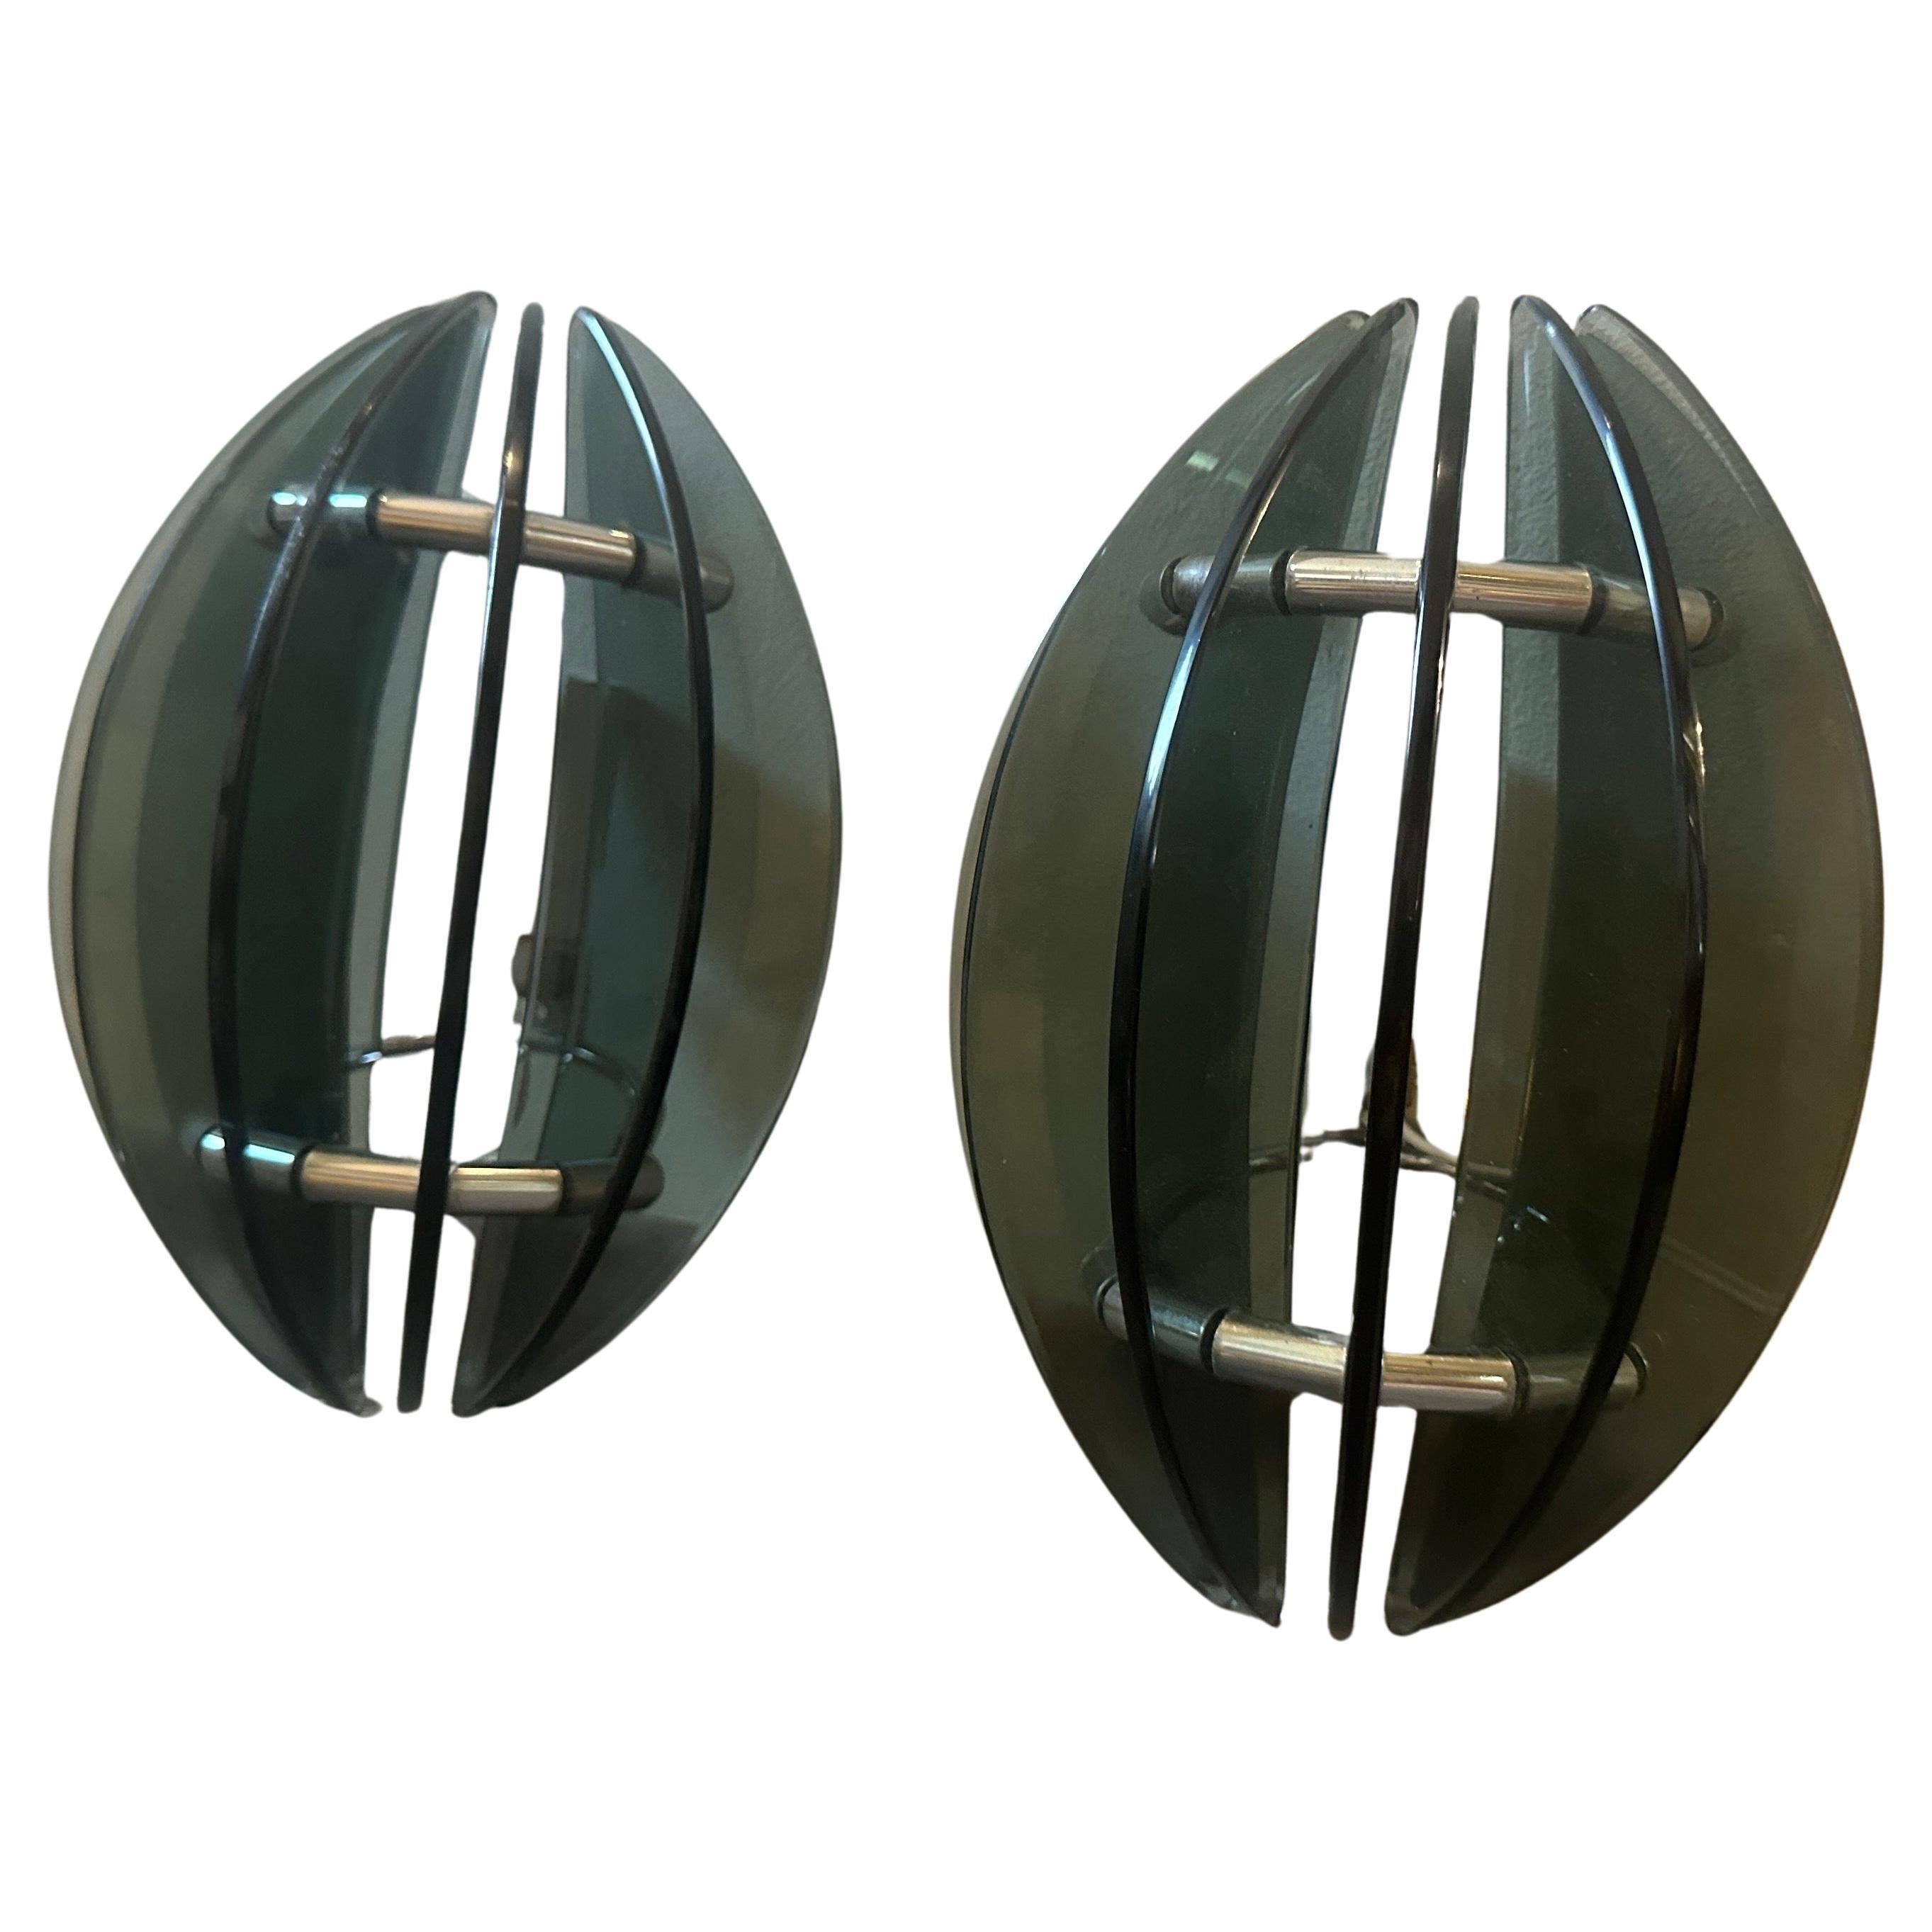 A pair of wall sconces designed and manufactured in Italy by Veca in the Space Age Era, they are in very good original condition and in working order. In the 1970s, the Space Age design movement embraced futuristic and avant-garde styles, often